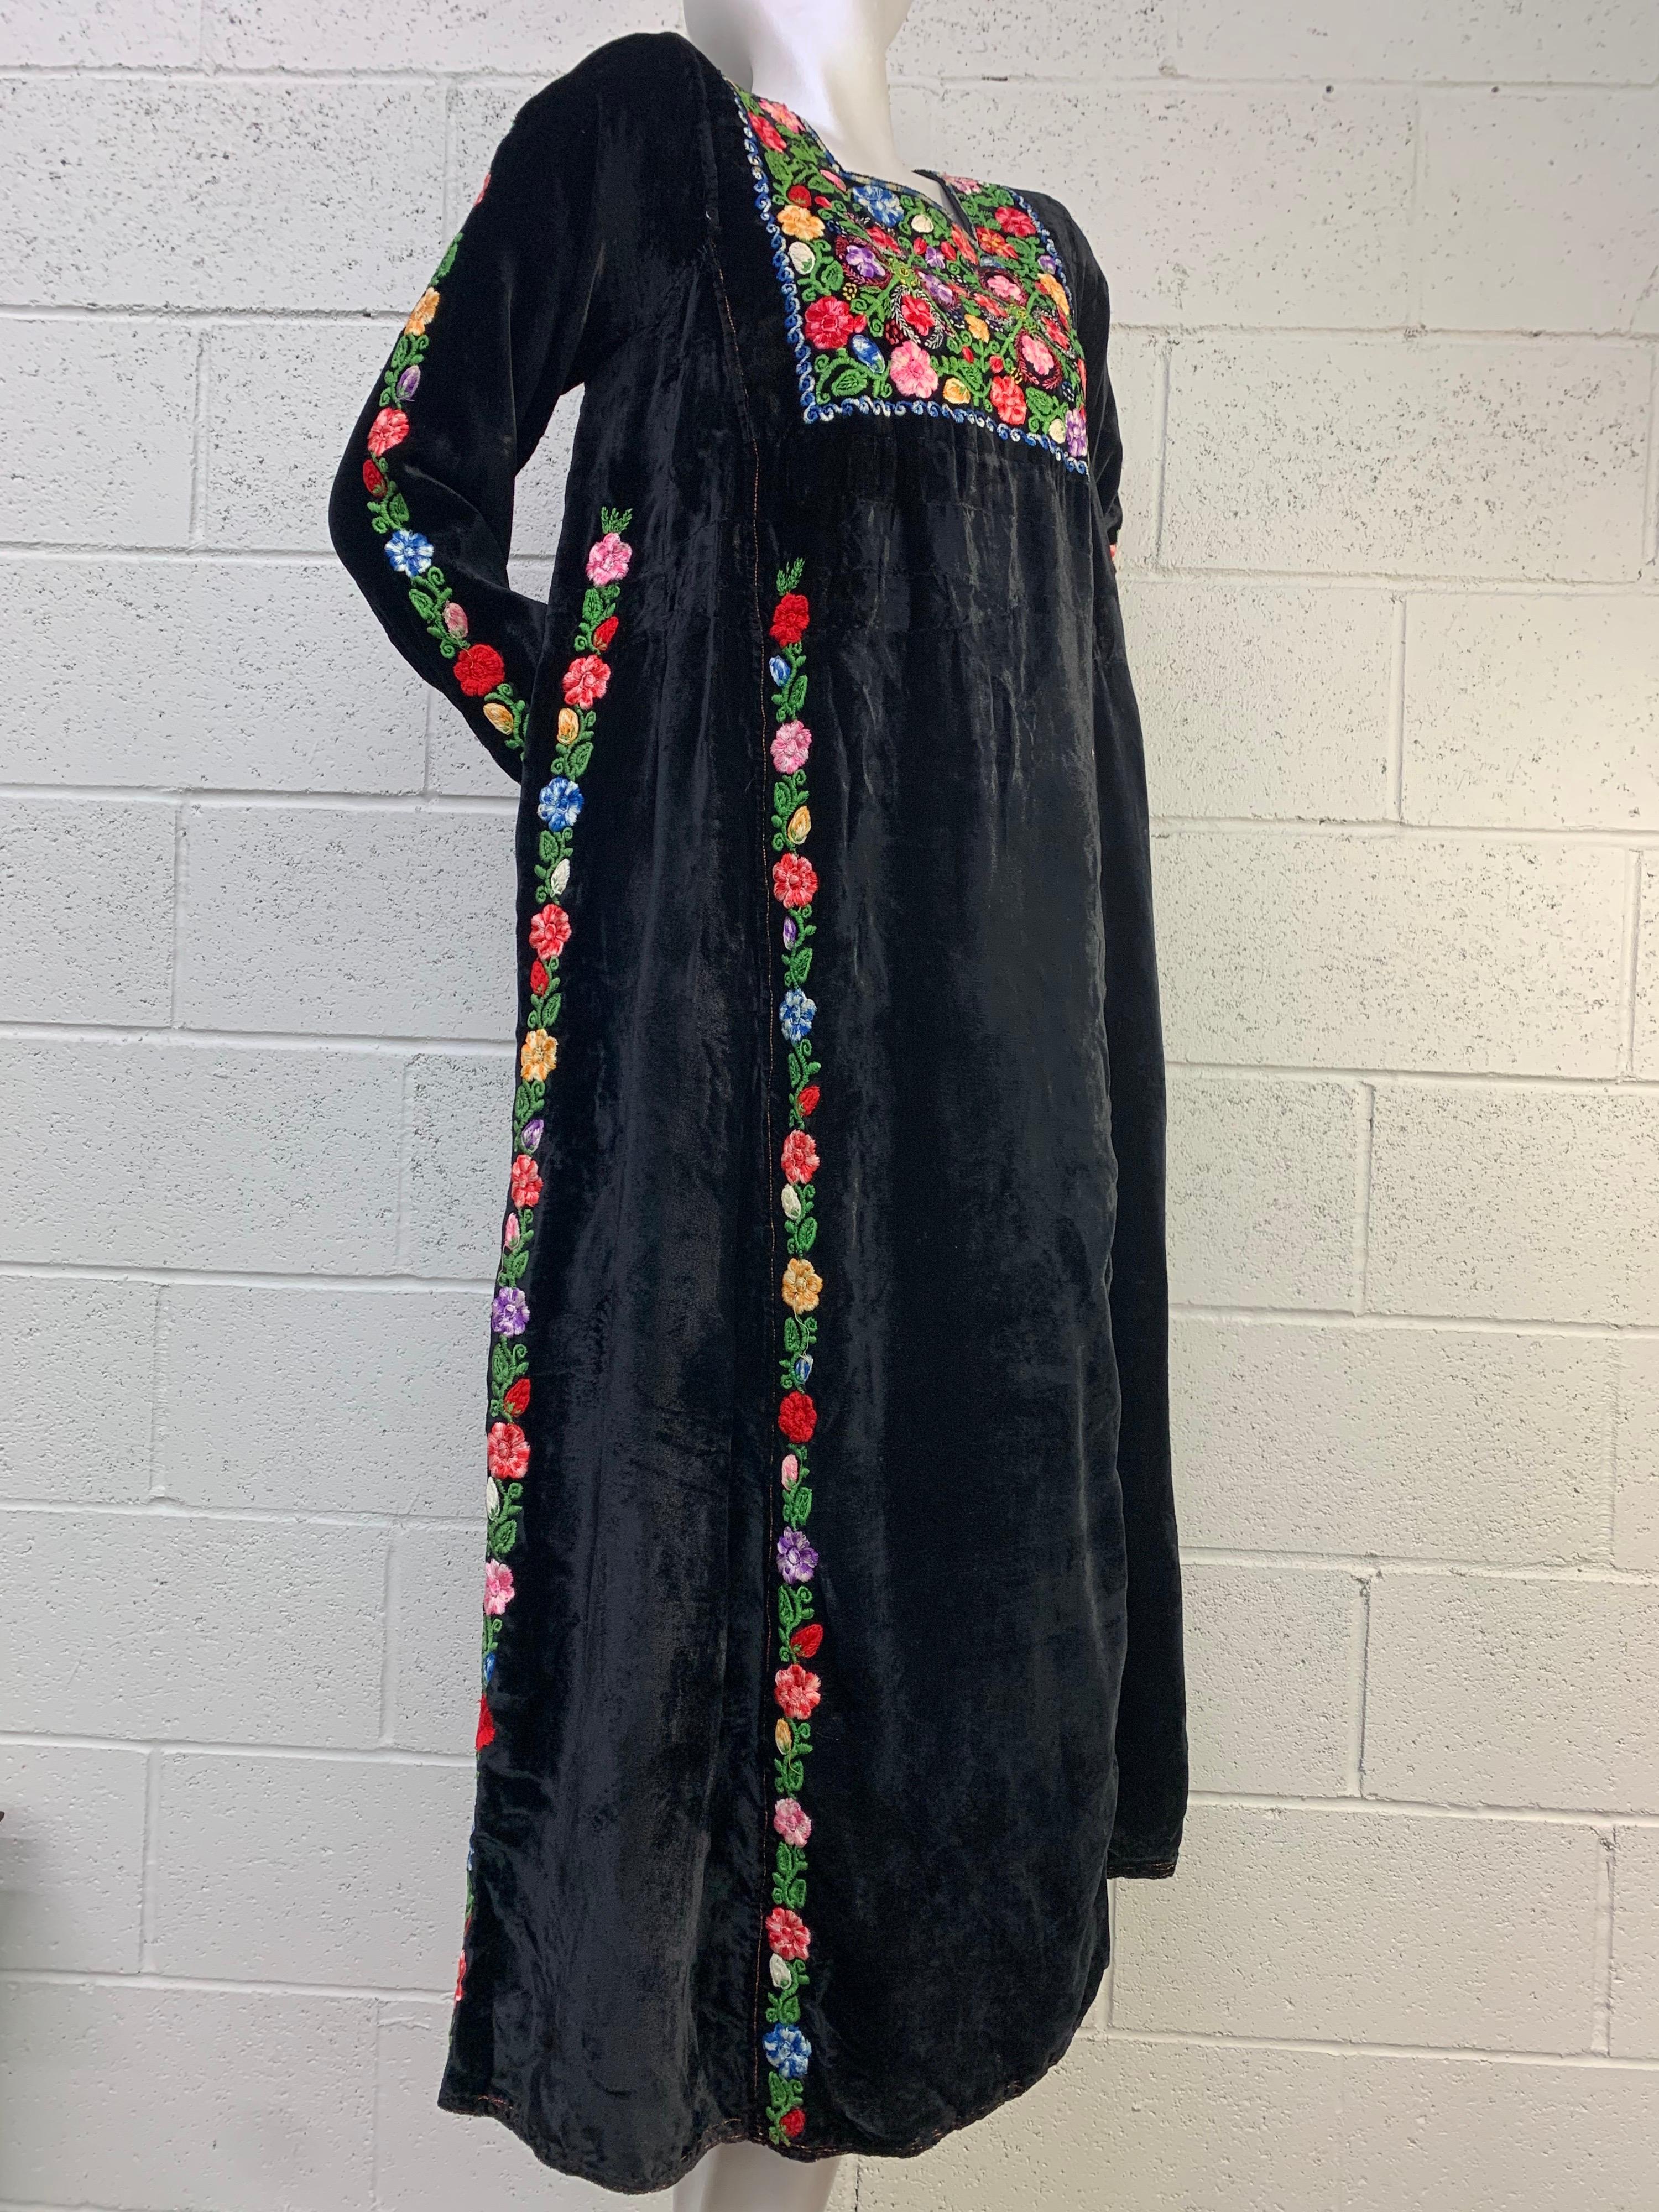 An imported 1960s Boho, Renaissance-revival styled black velvet maxi dress with heavily embroidered floral panels at front bust and streaming down each side. Size 6. Think Woodstock Guinnevere groove.